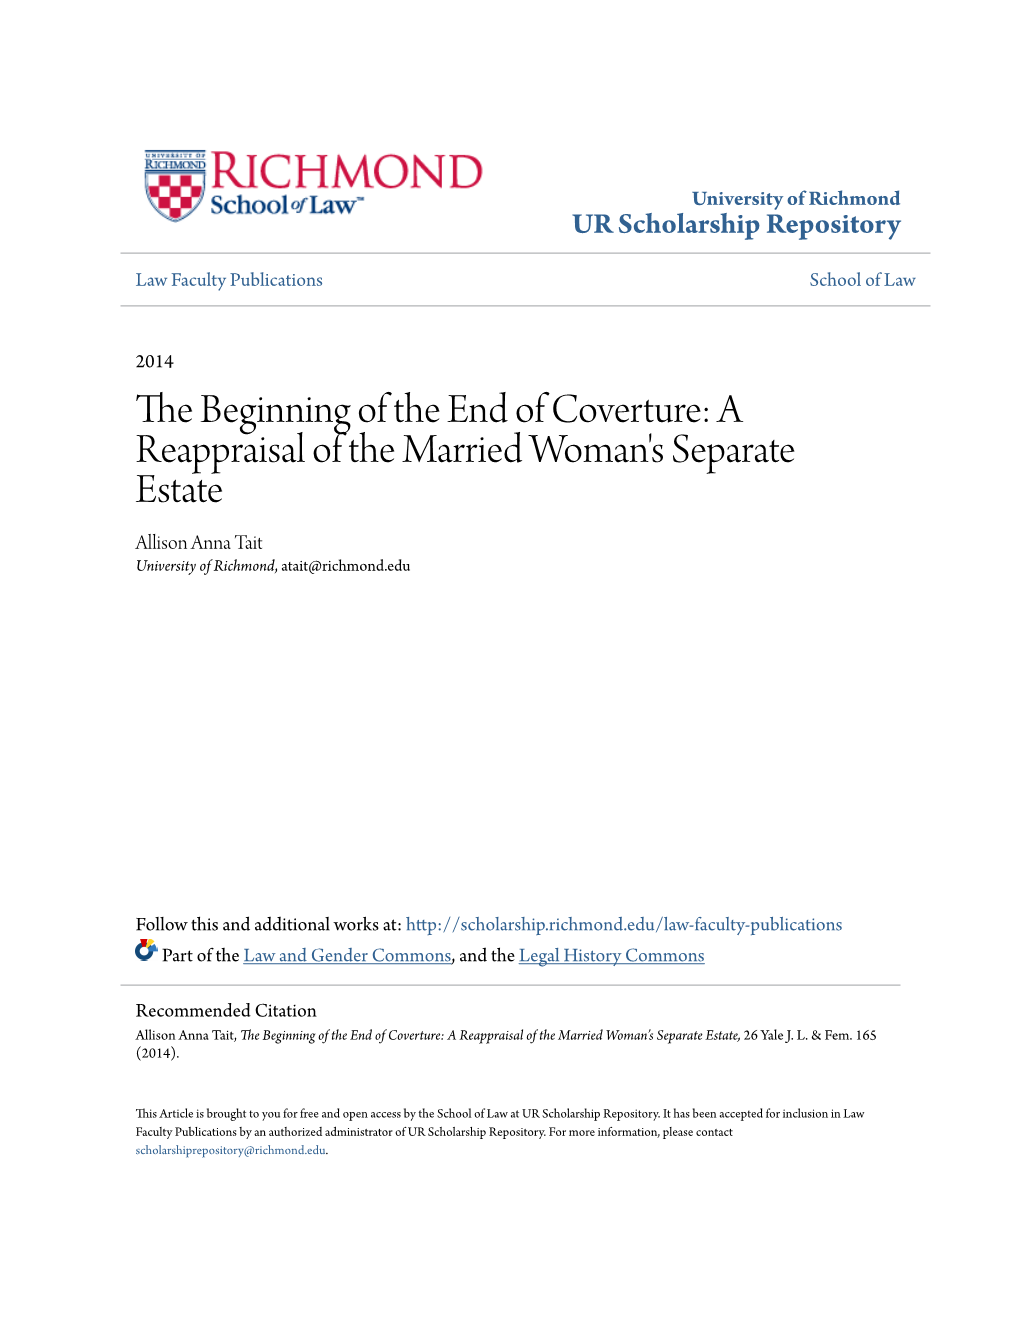 The Beginning of the End of Coverture: a Reappraisal of the Married Woman's Separate Estate Allison Anna Tait University of Richmond, Atait@Richmond.Edu